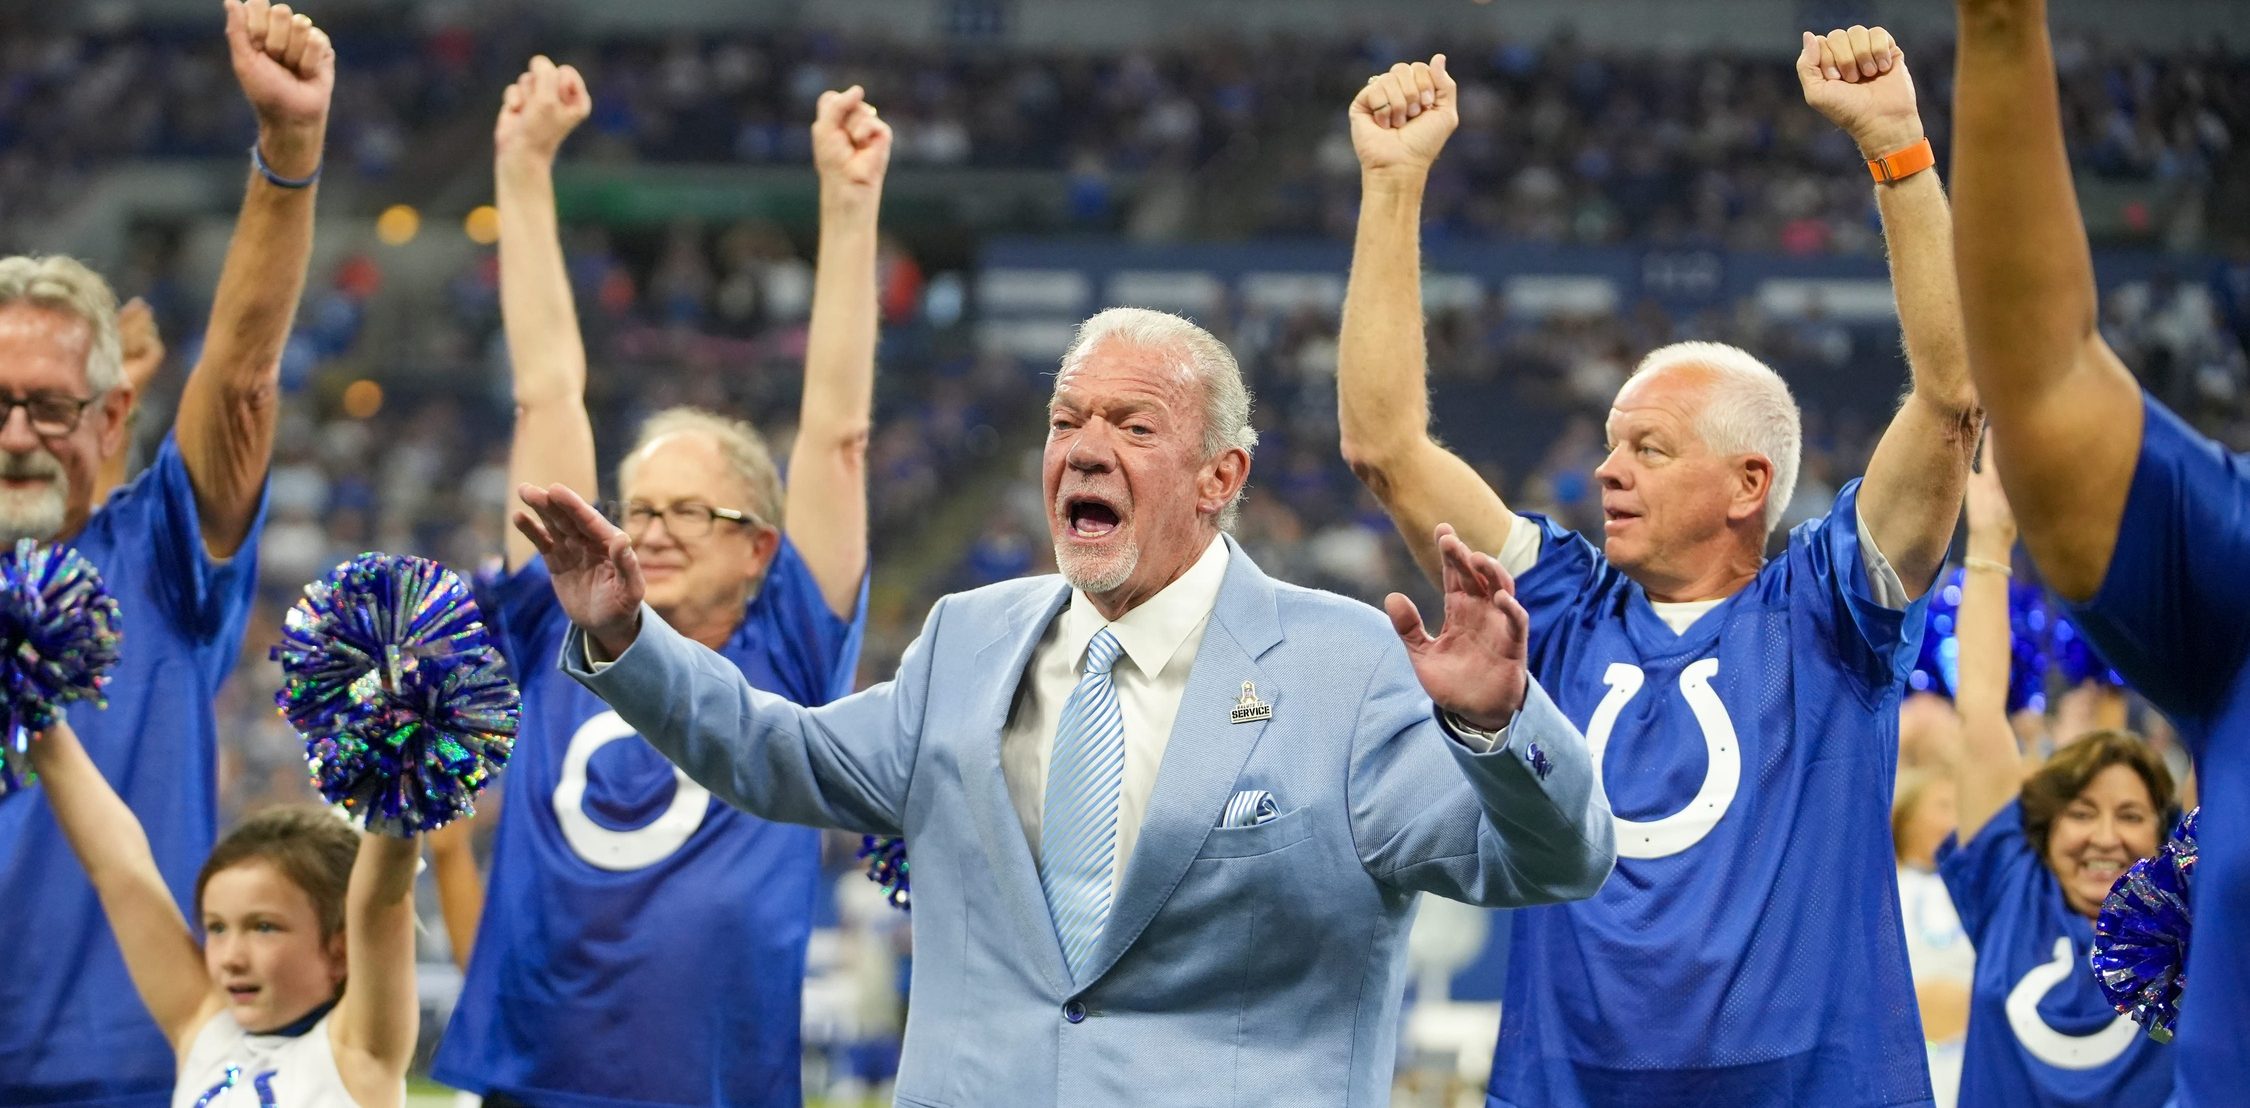 Jim Irsay, Colts owner, participates in a special grandparents event